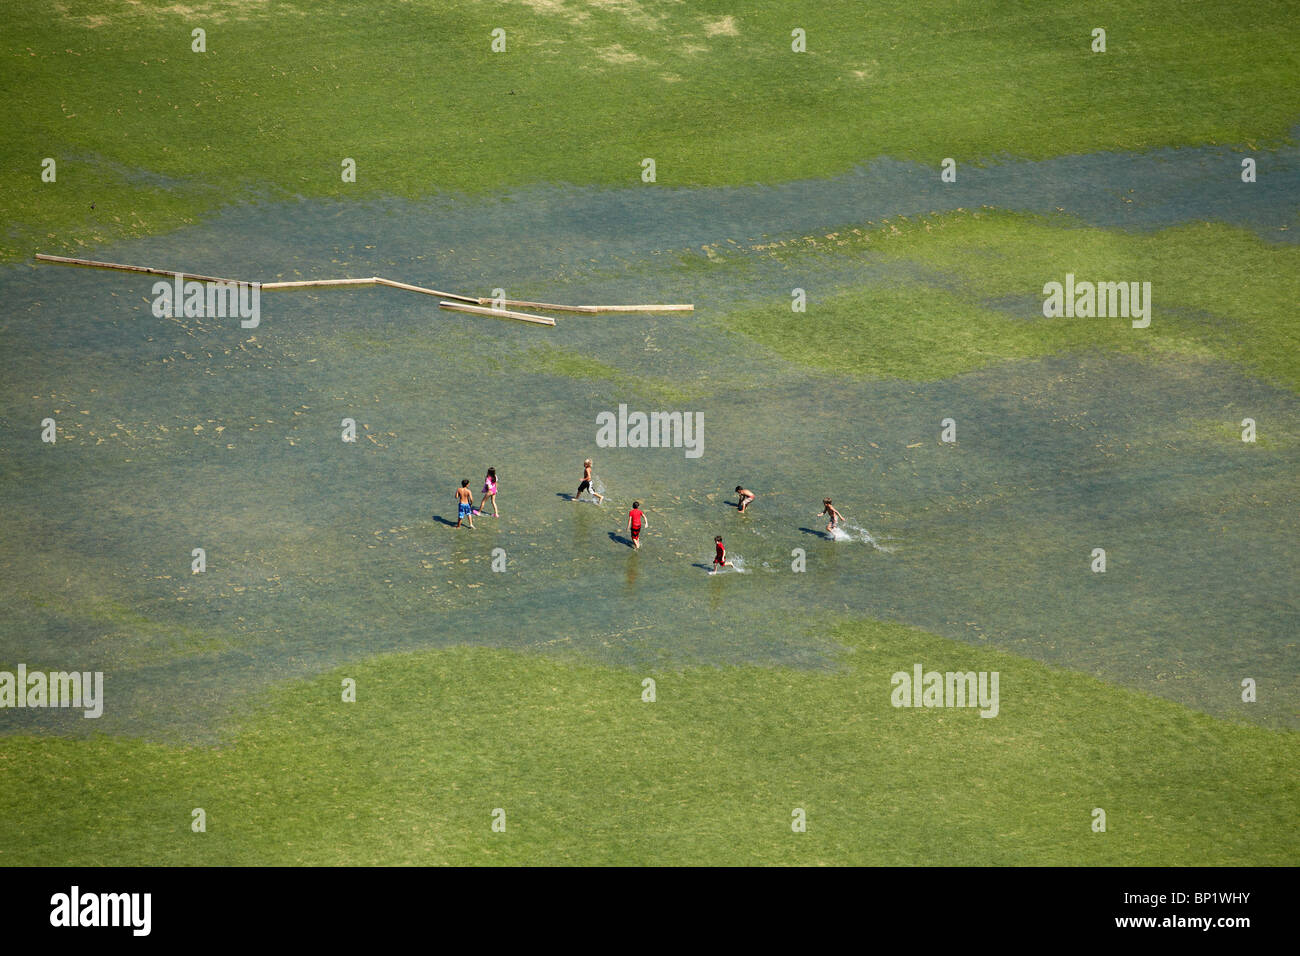 Children Playing on Flooded Sports Field, Vitacura, Santiago, Chile, South America - aerial Stock Photo